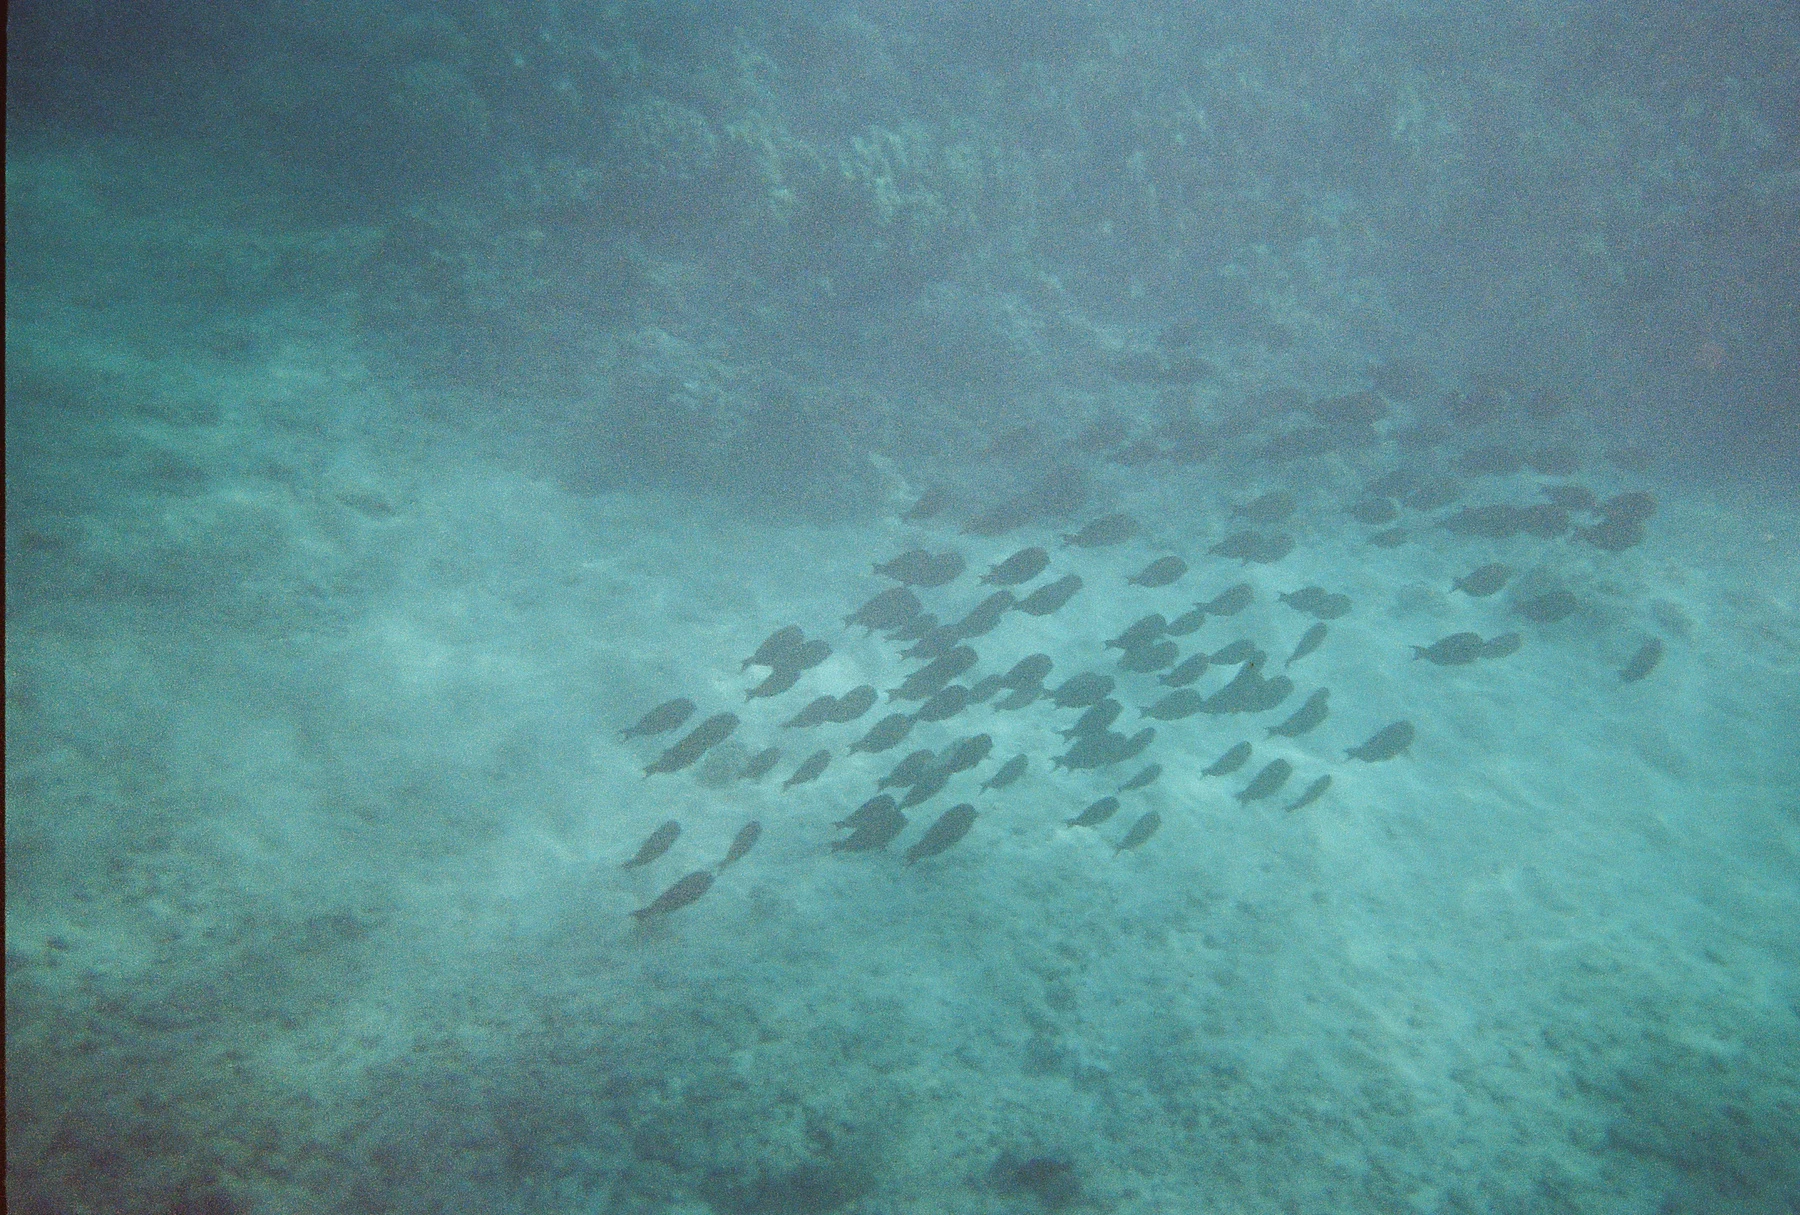 A view at the bottom of Kahekili Beach as one of the best snorkeling spots in Hawaii where a school of fish is swimming in one direction and coral reefs in background